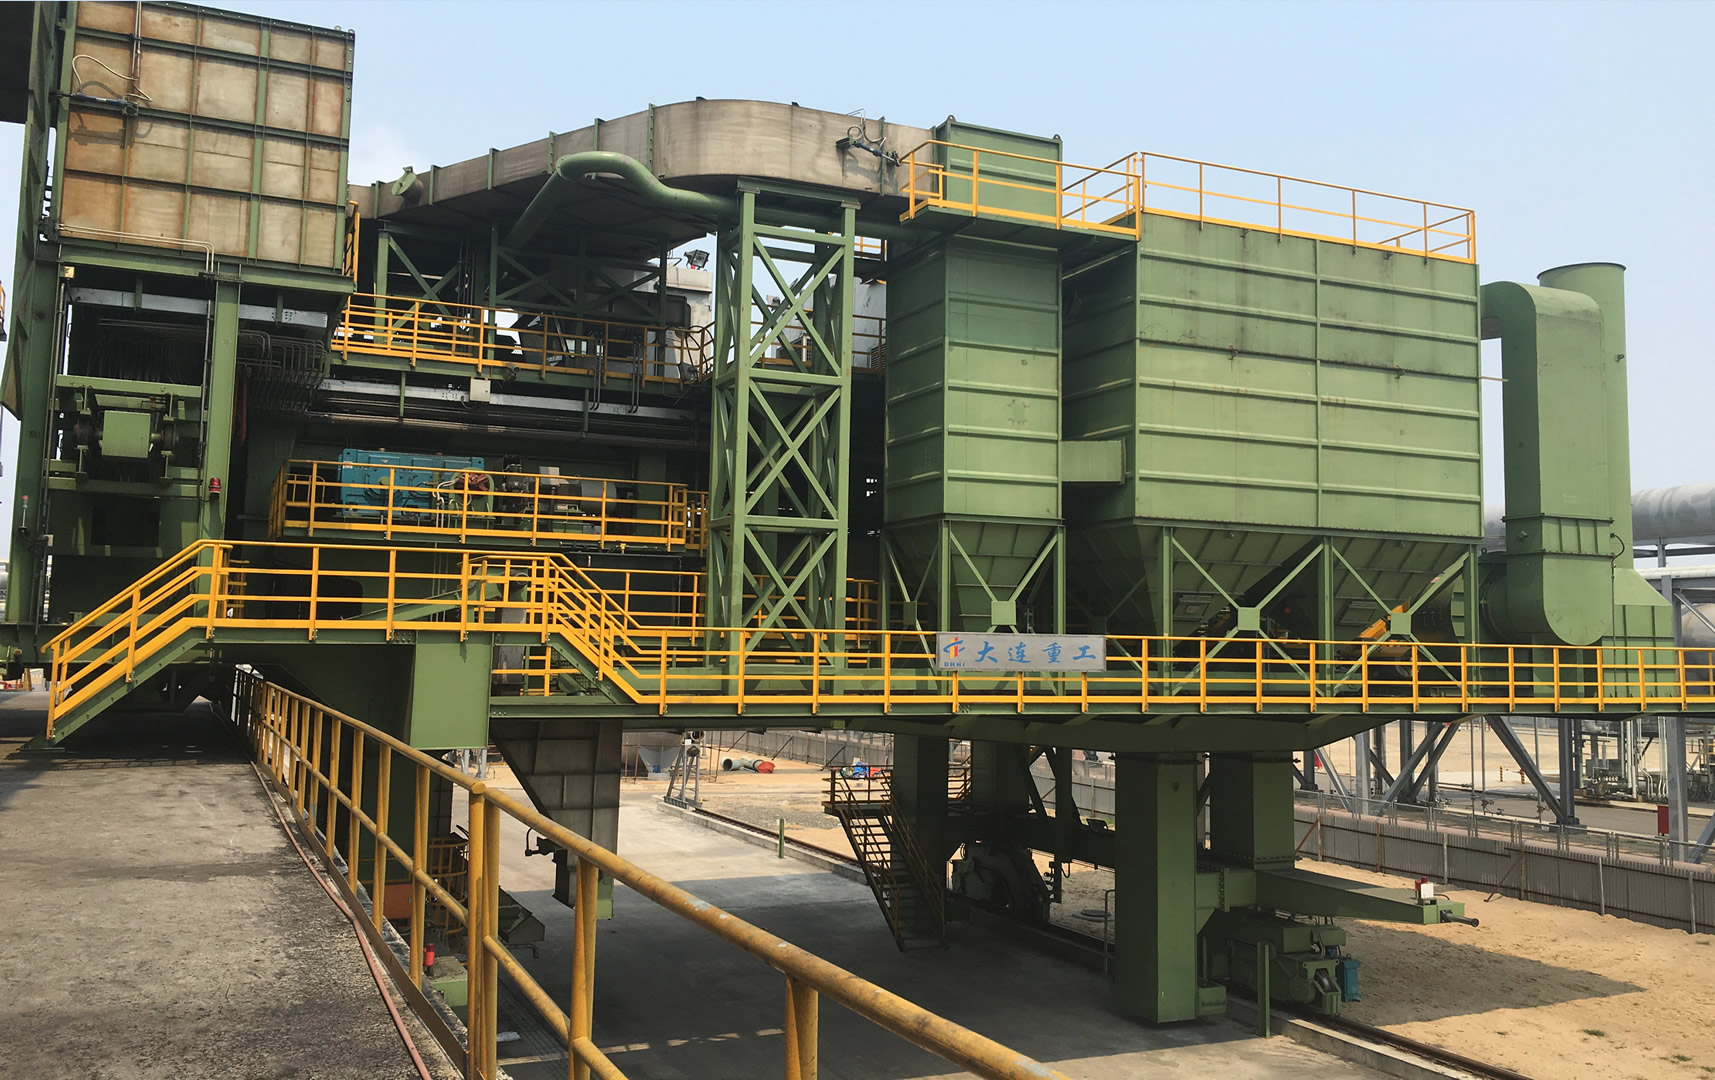 7m coke oven machinery (exported to Vietnam)